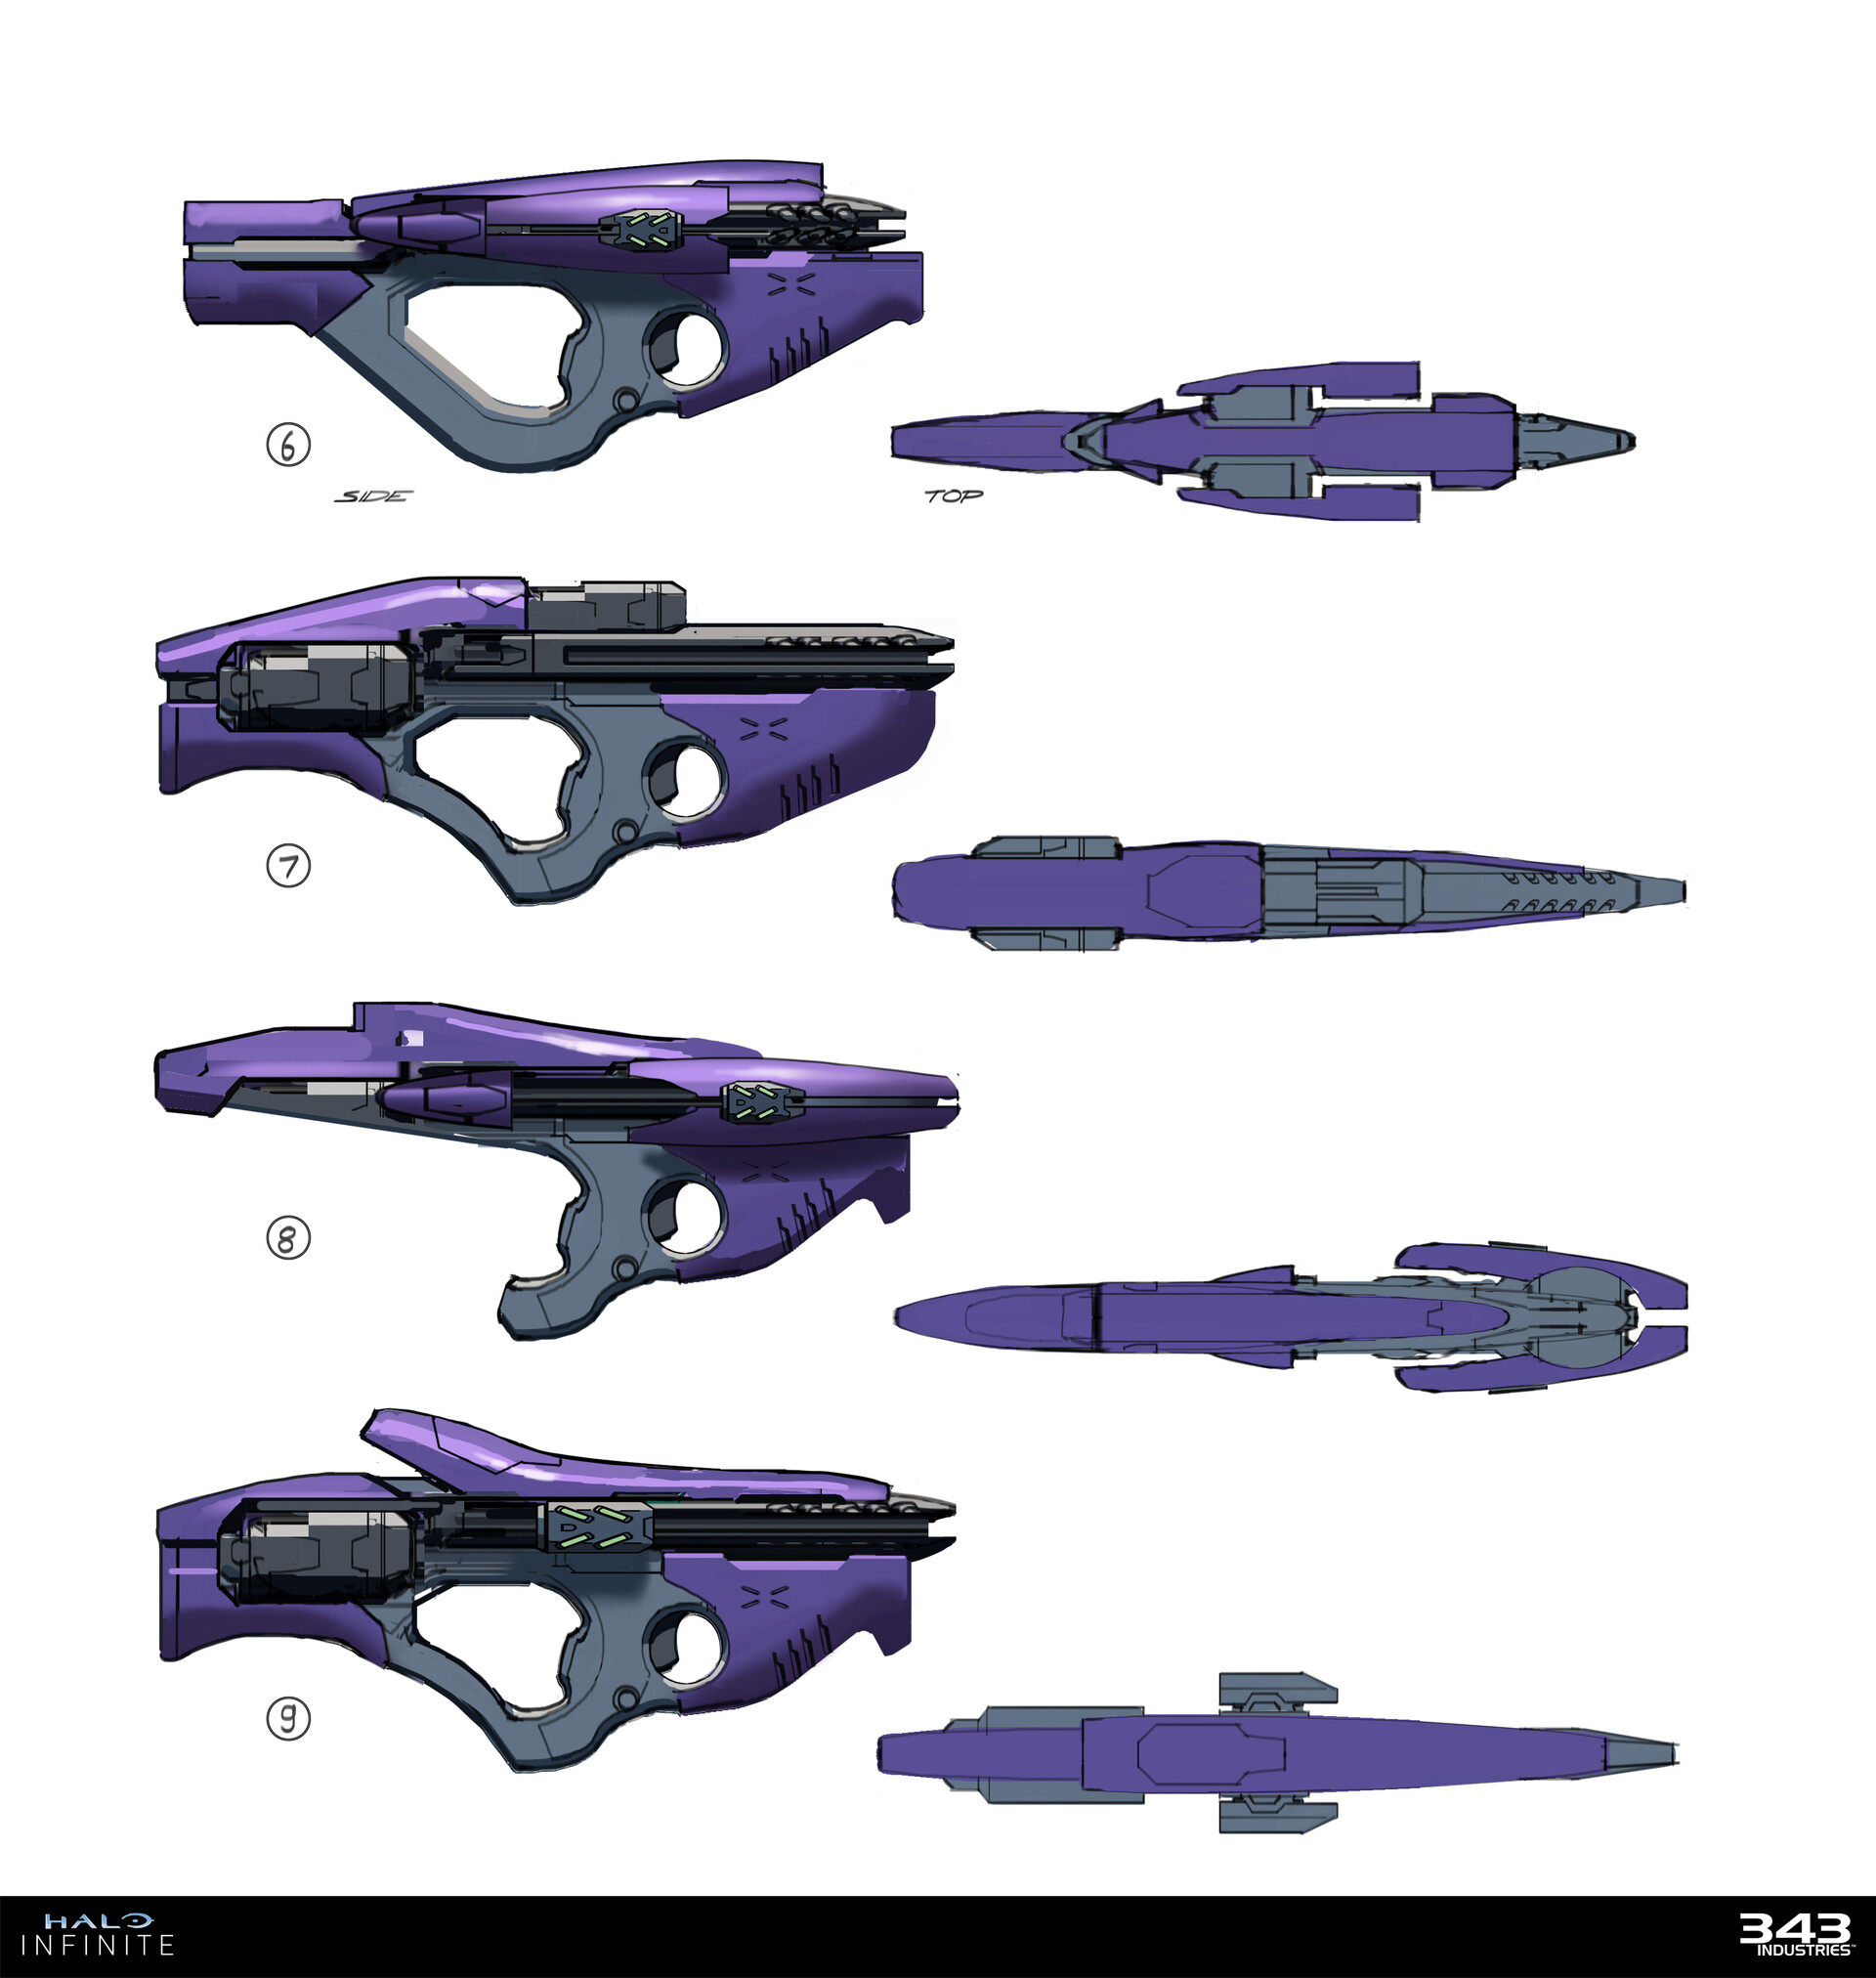 ArtStation - Halo Infinite Weapons and Prop Concepts